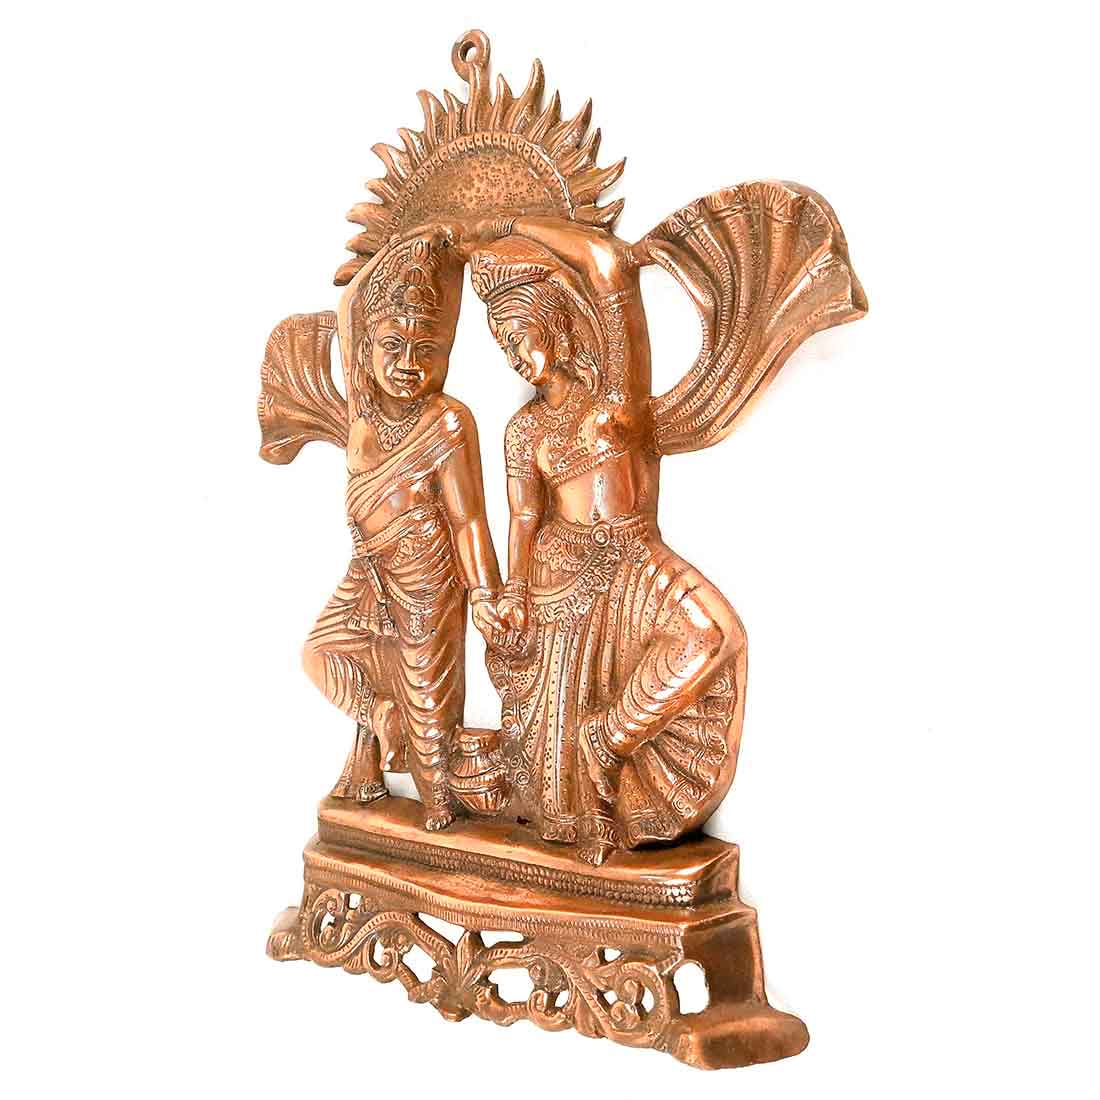 Radha Krishna Idol Wall Hanging Art | Radhe Krishna Dancing Wall Statue Murti | Wedding Gift for Couples | Religious Gift - for Home, Living Room, Office, Puja , Entrance Decoration  - 19 Inch